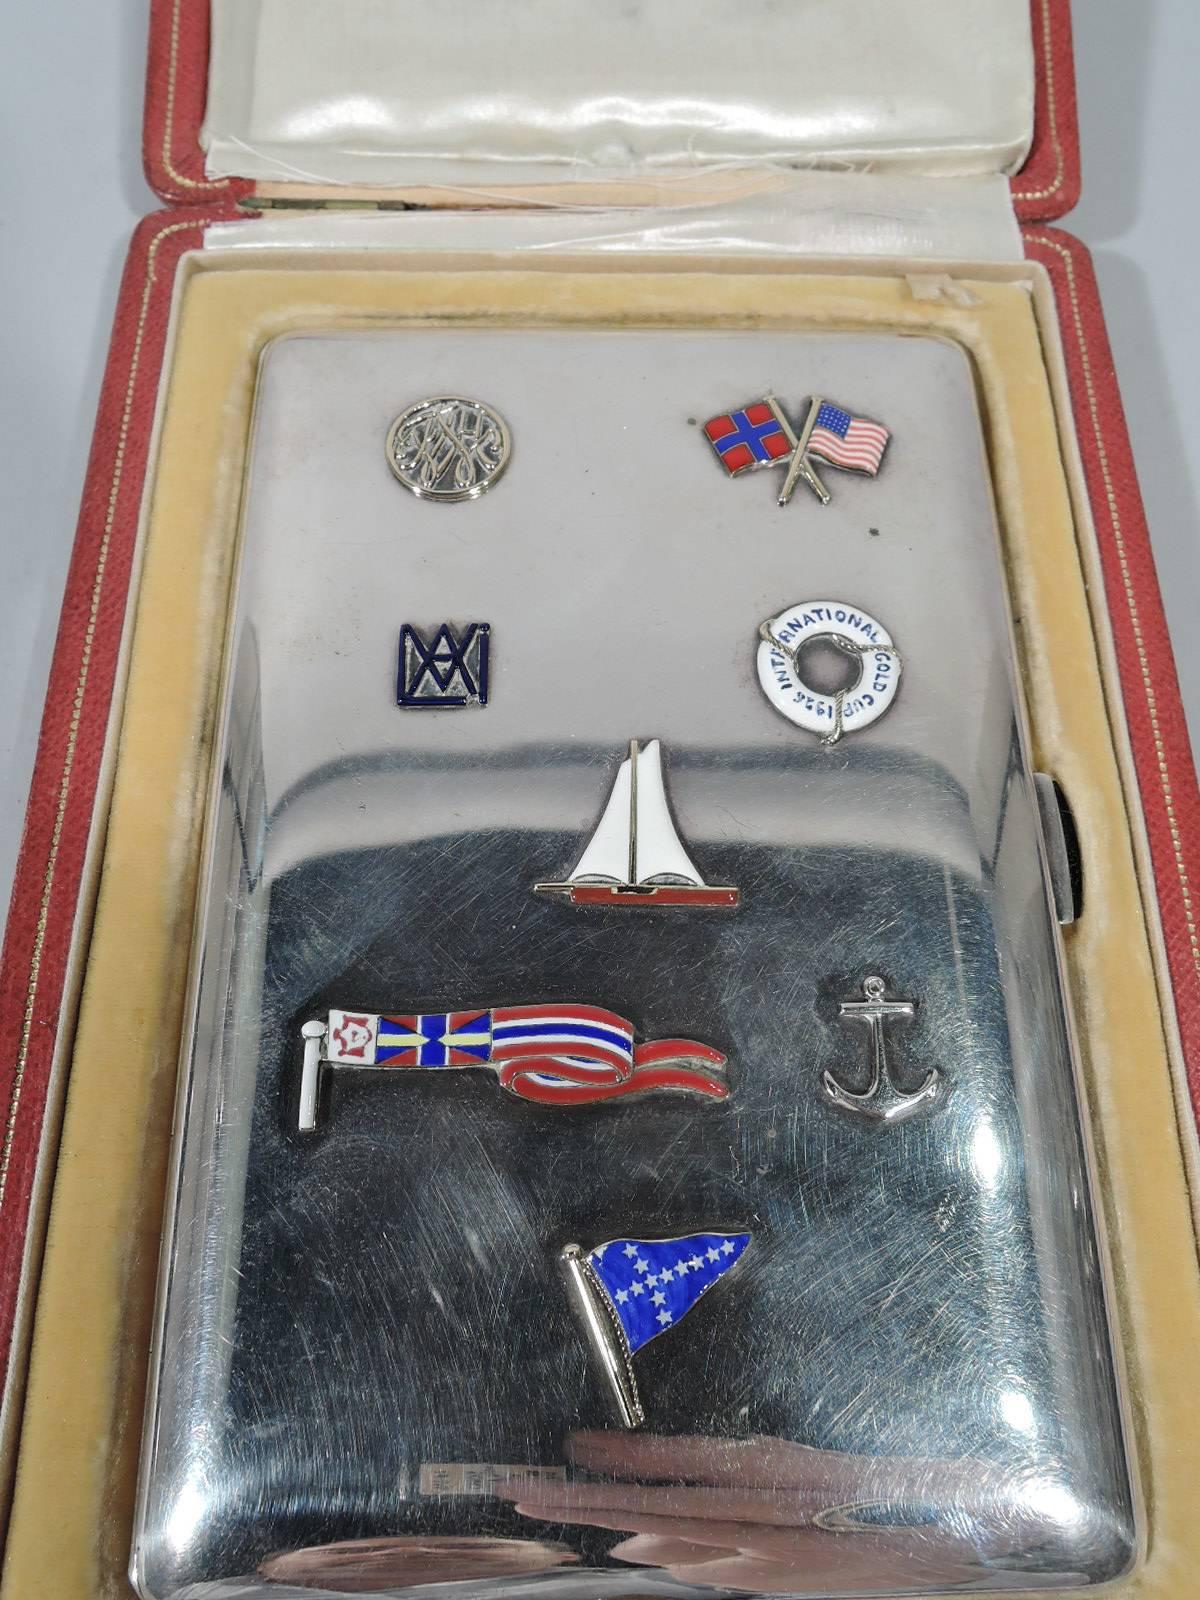 Art Deco 950 silver and enamel cigarette case. Retailed by Cartier in France. Rectangular and hinged. On cover are enameled nautical and national symbols including a sailboat, lifesaver American and Norwegian flags, and pennant. This case presented